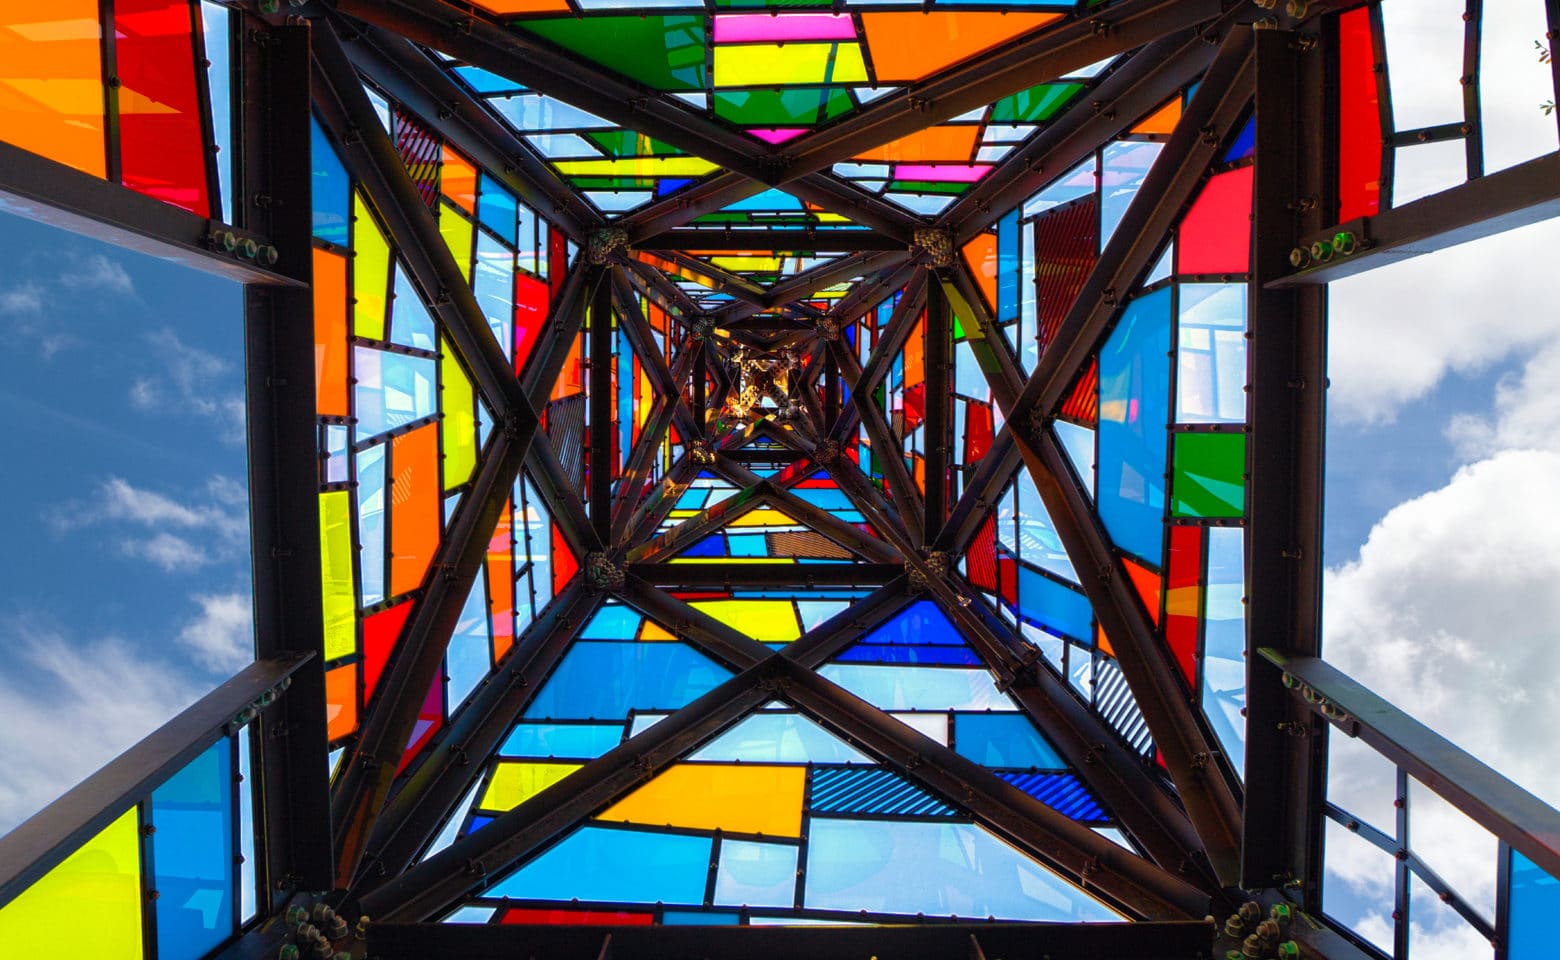 Inside of a stained glass windmill by Tom Fruin